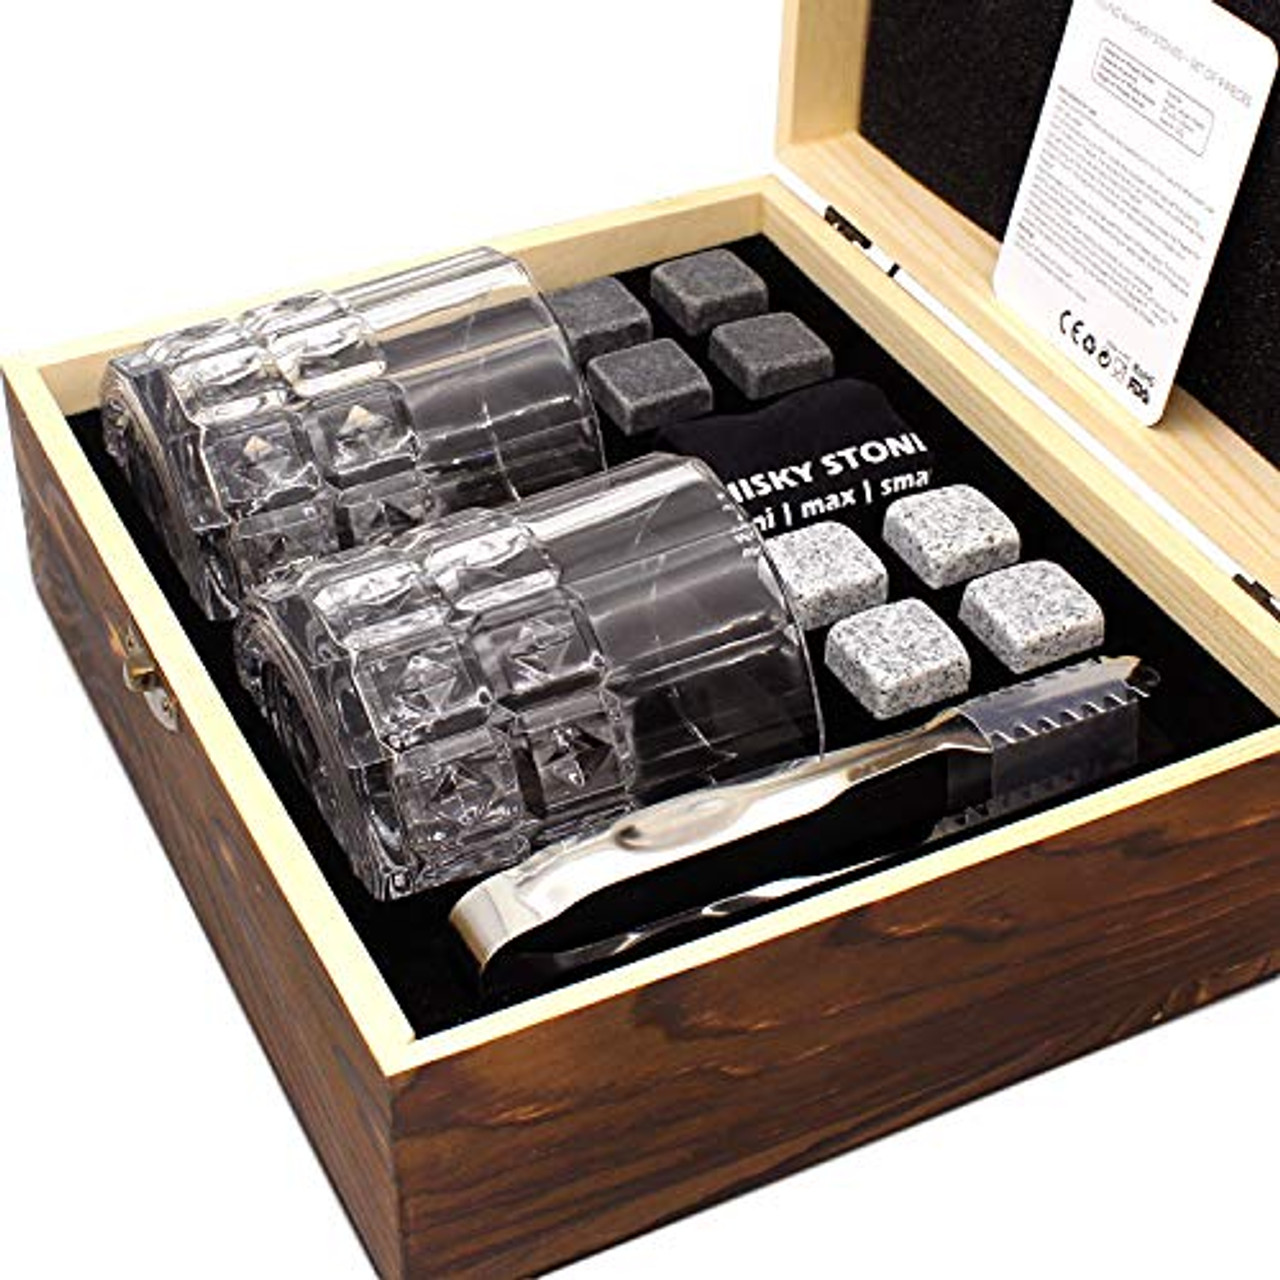 Whiskey Gifts for Men, Whiskey Stones Gift Set,10 oz Whiskey Glasses Set of 2 + Man Crates, Scotch Bourbon Gifts for Him Husband Dad Birthday